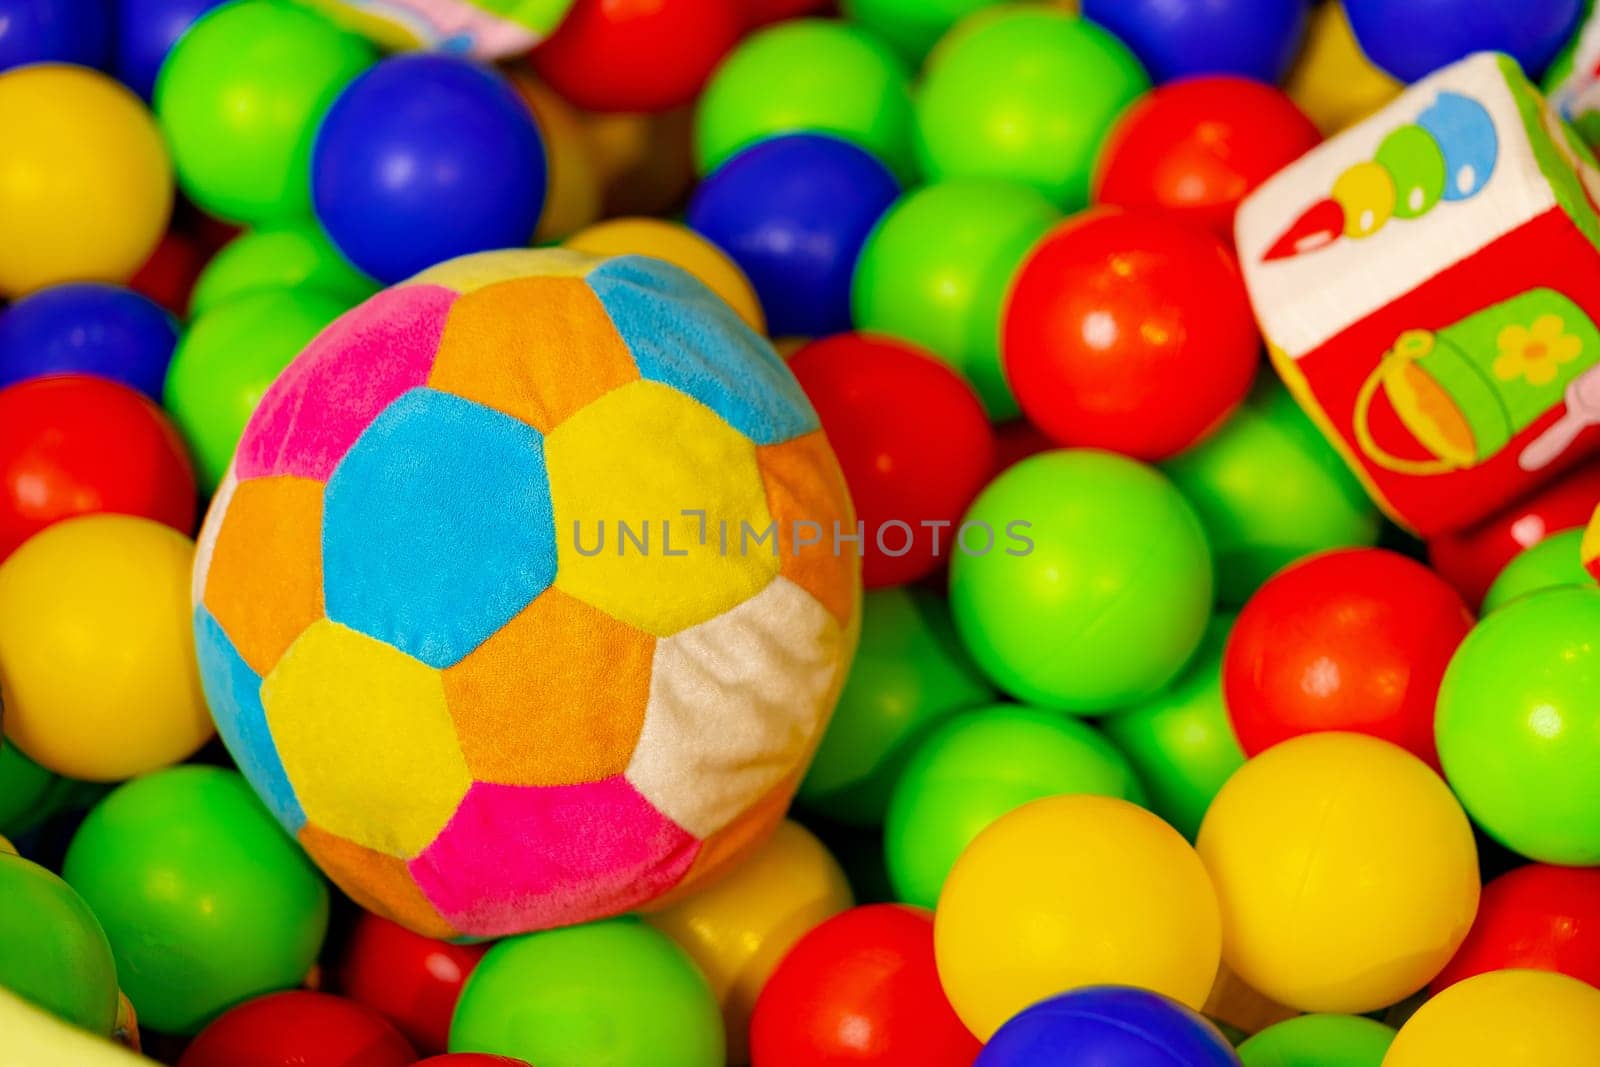 A vibrantly colored soft ball and a small toy truck rest among a multitude of red, yellow, blue, and green plastic balls in a play area, suggesting a lively and fun atmosphere typically found in a childrens indoor playground.